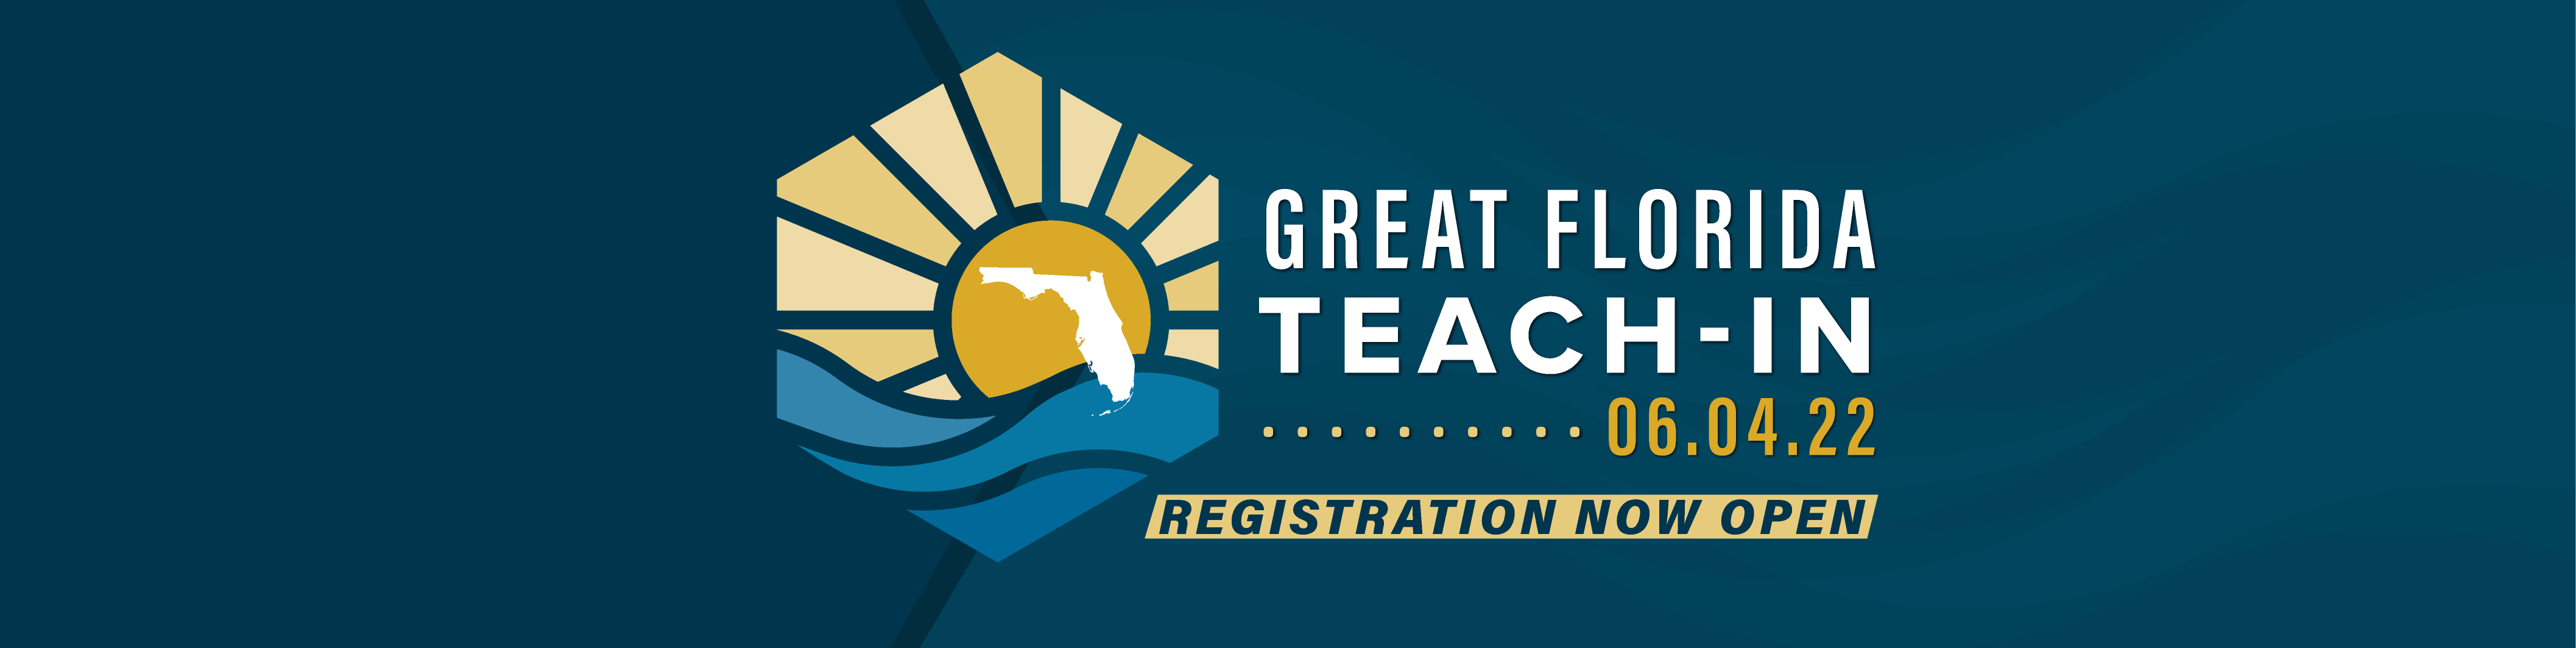 Great Florida Teach-In - registration now open